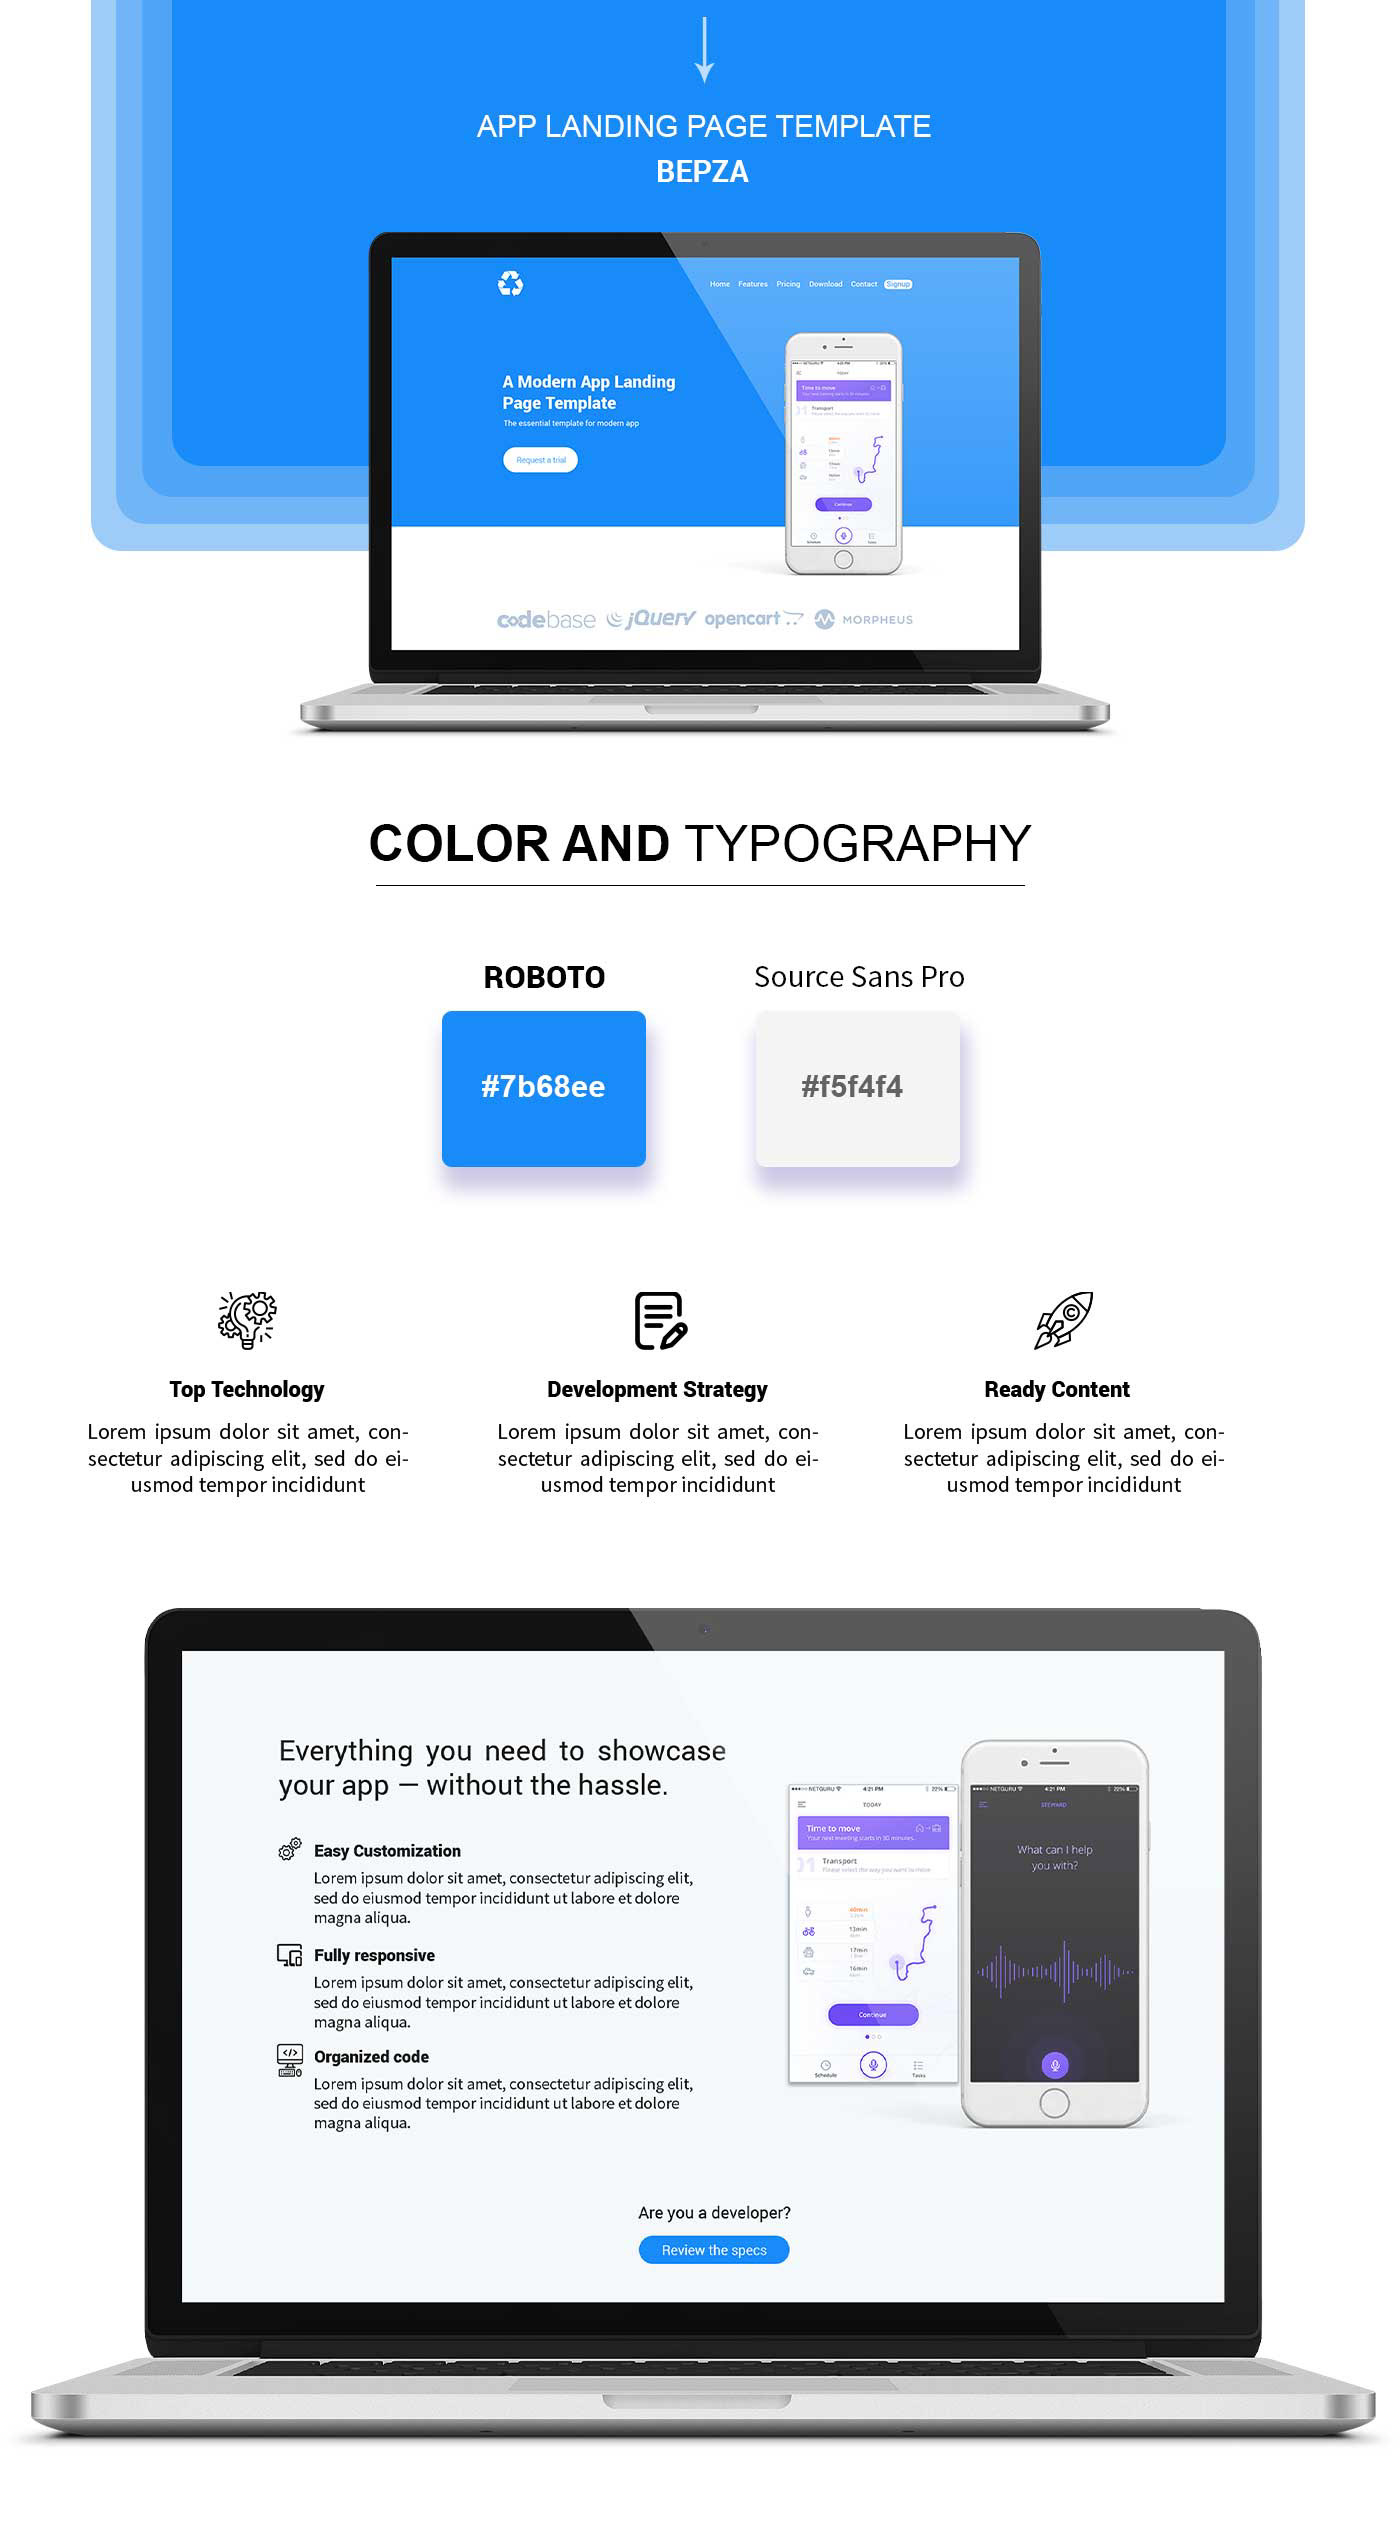 Adobe Photoshop landing page App Landing Page Free psd template Free Template Download landing page psd psd template